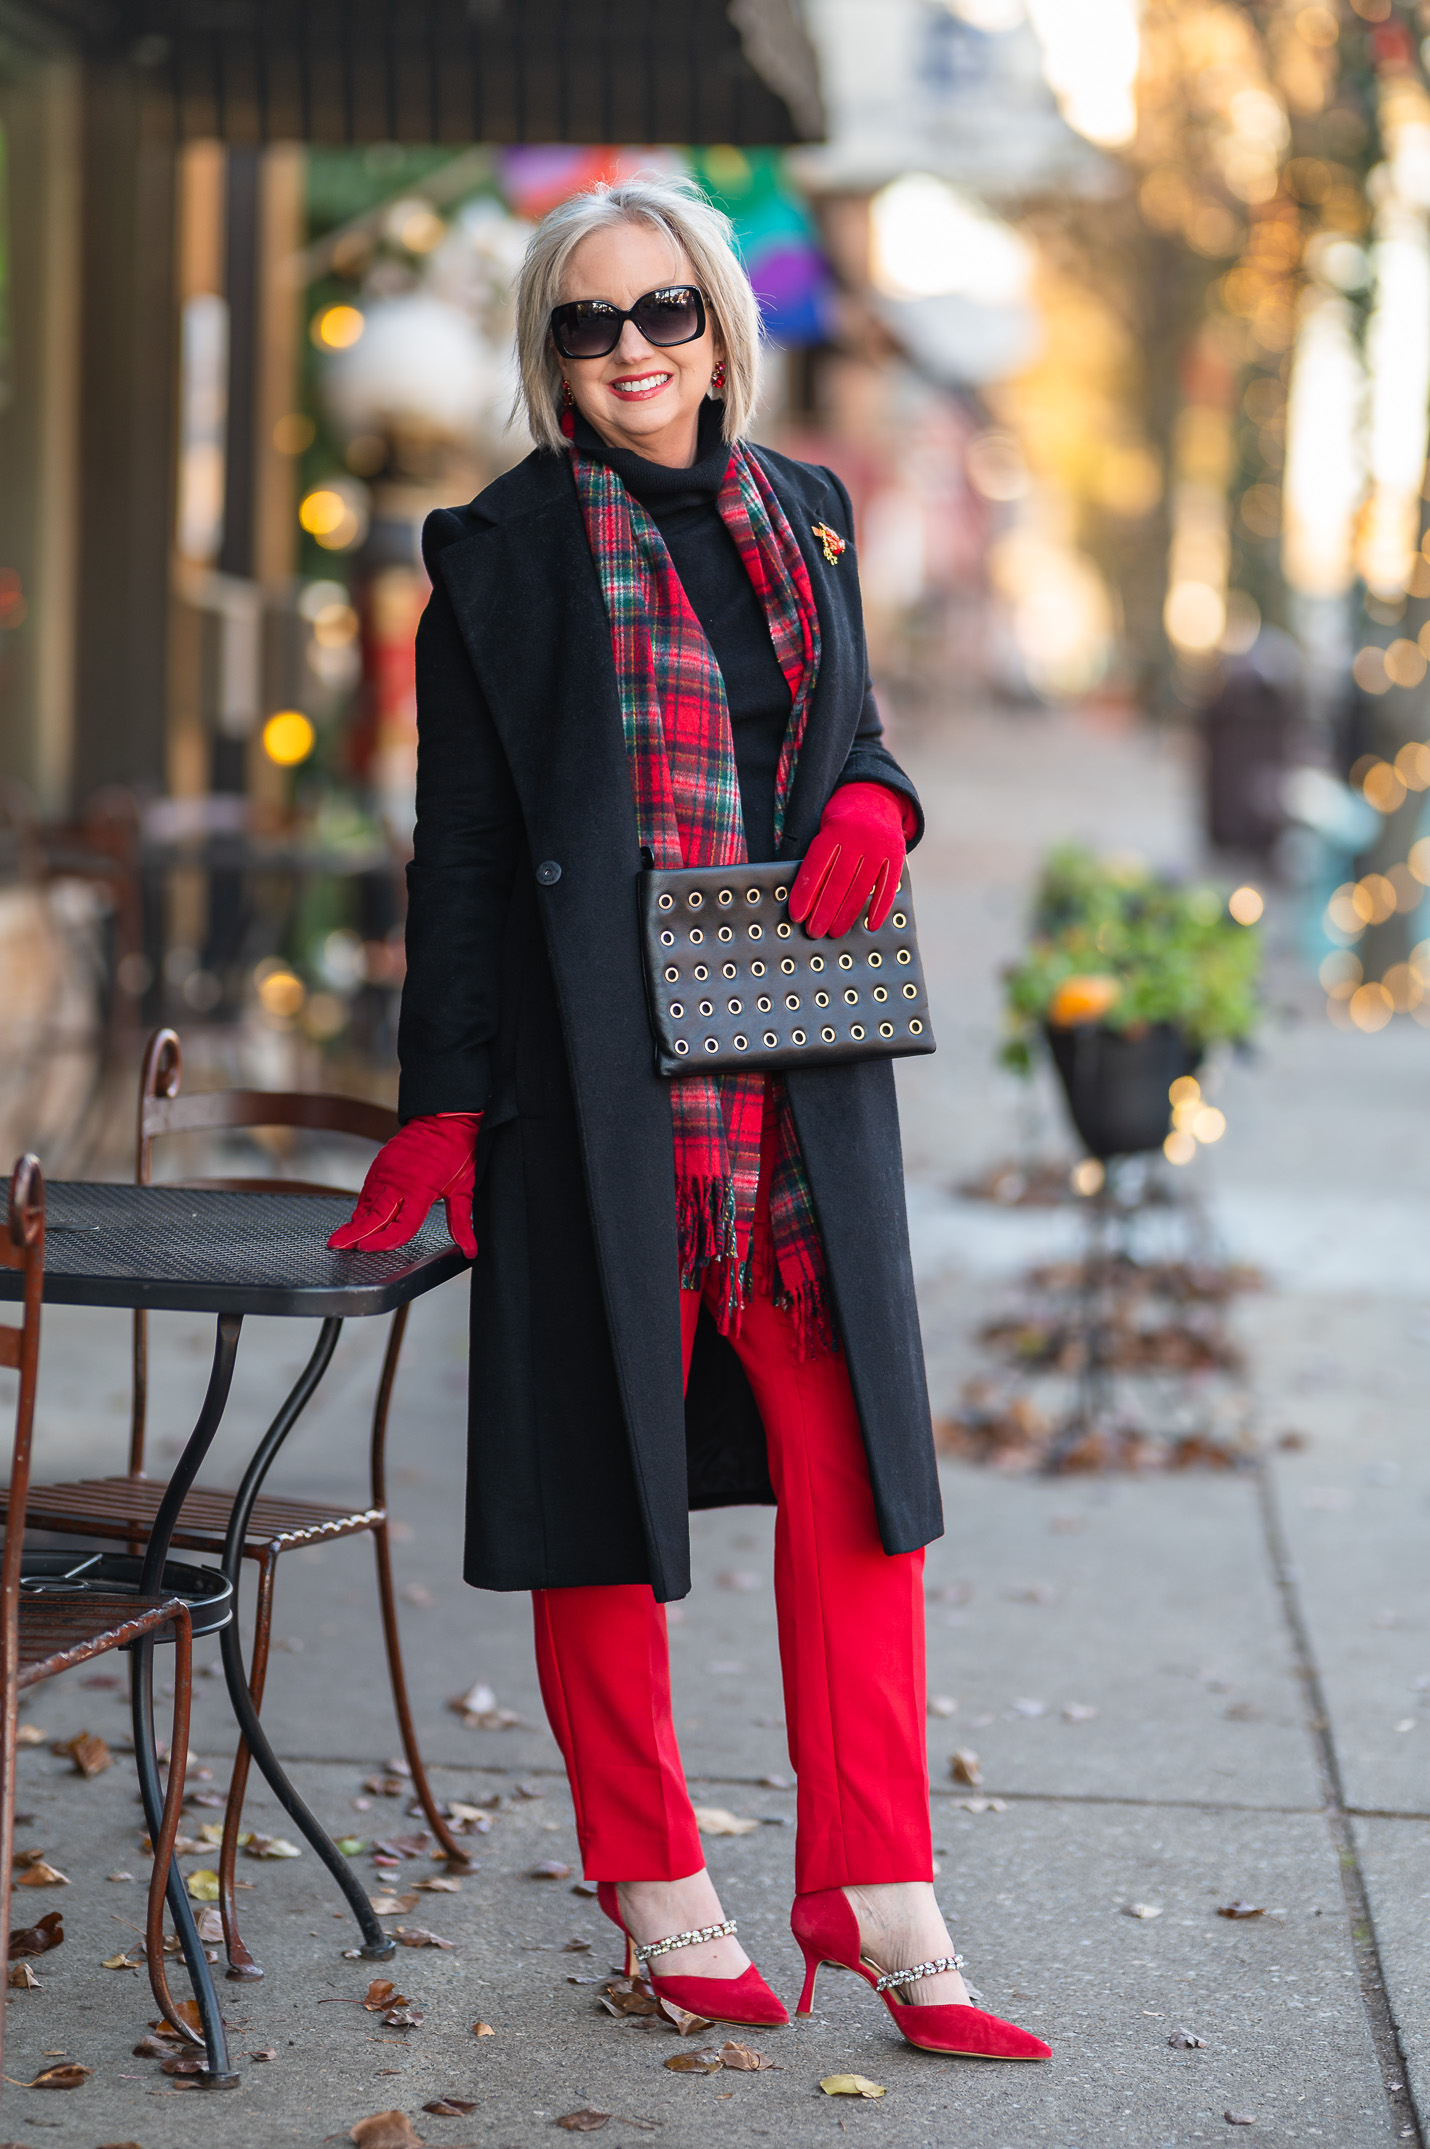 Red and Black Outfit for Daytime